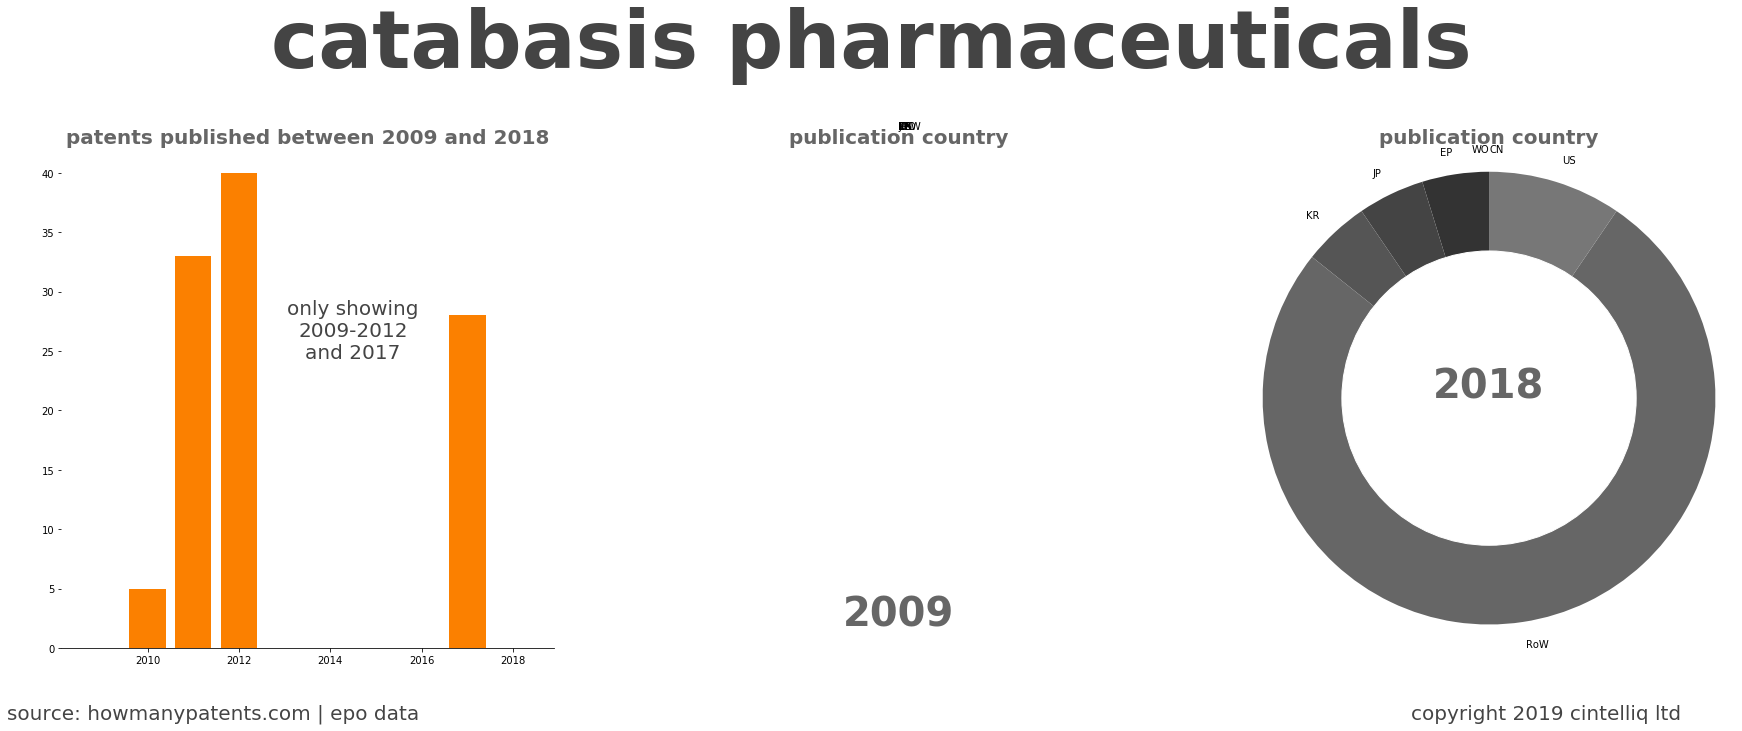 summary of patents for Catabasis Pharmaceuticals